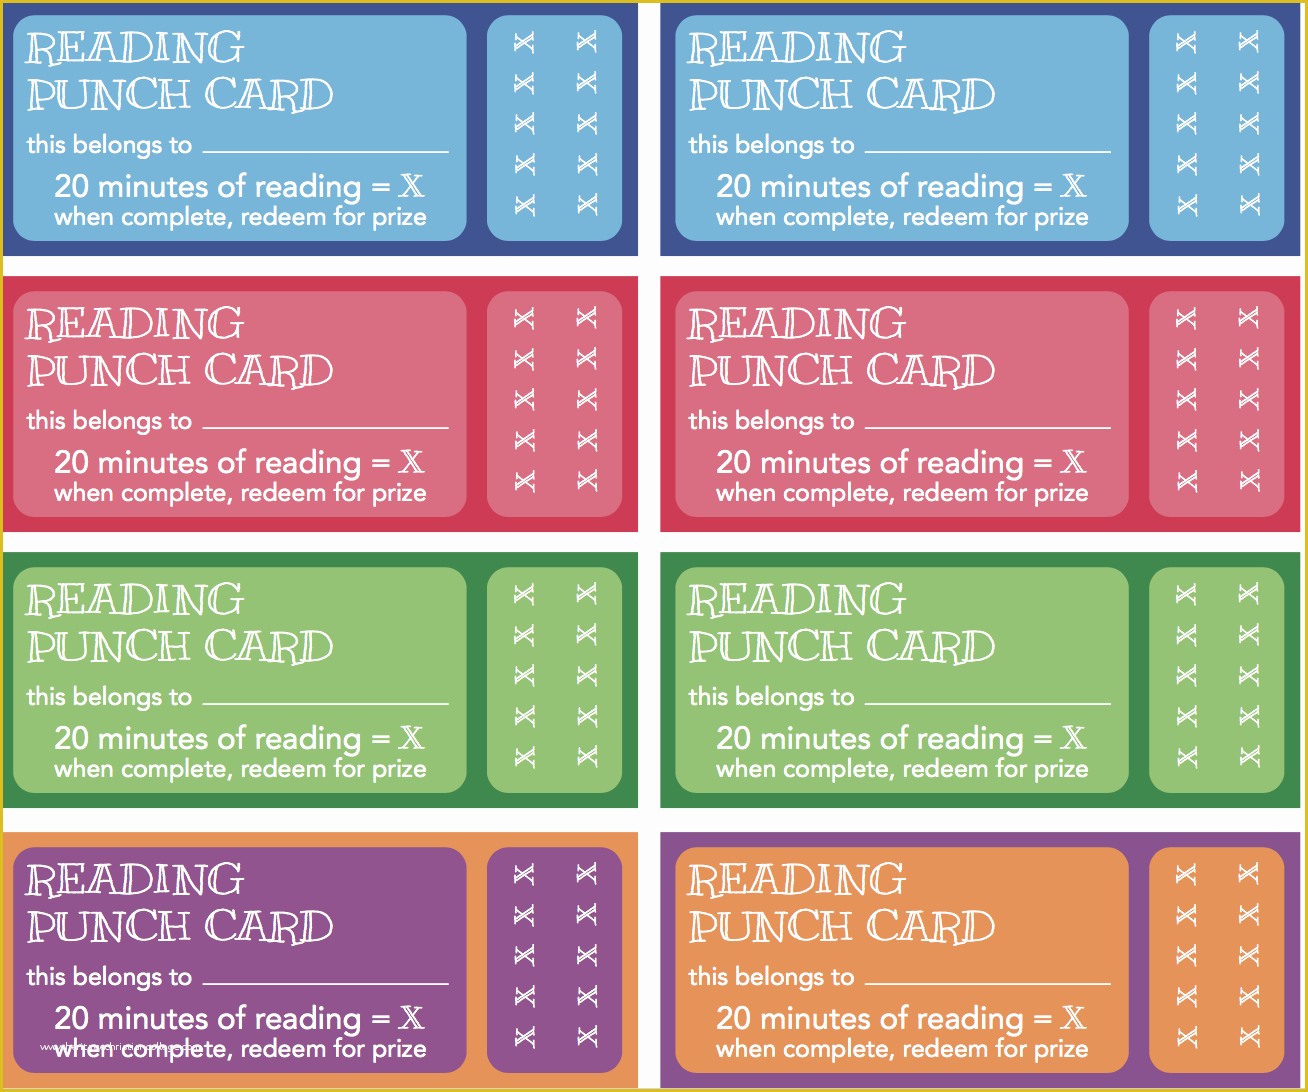 Free Punch Card Template or Design Of Reading Punch Card Printable